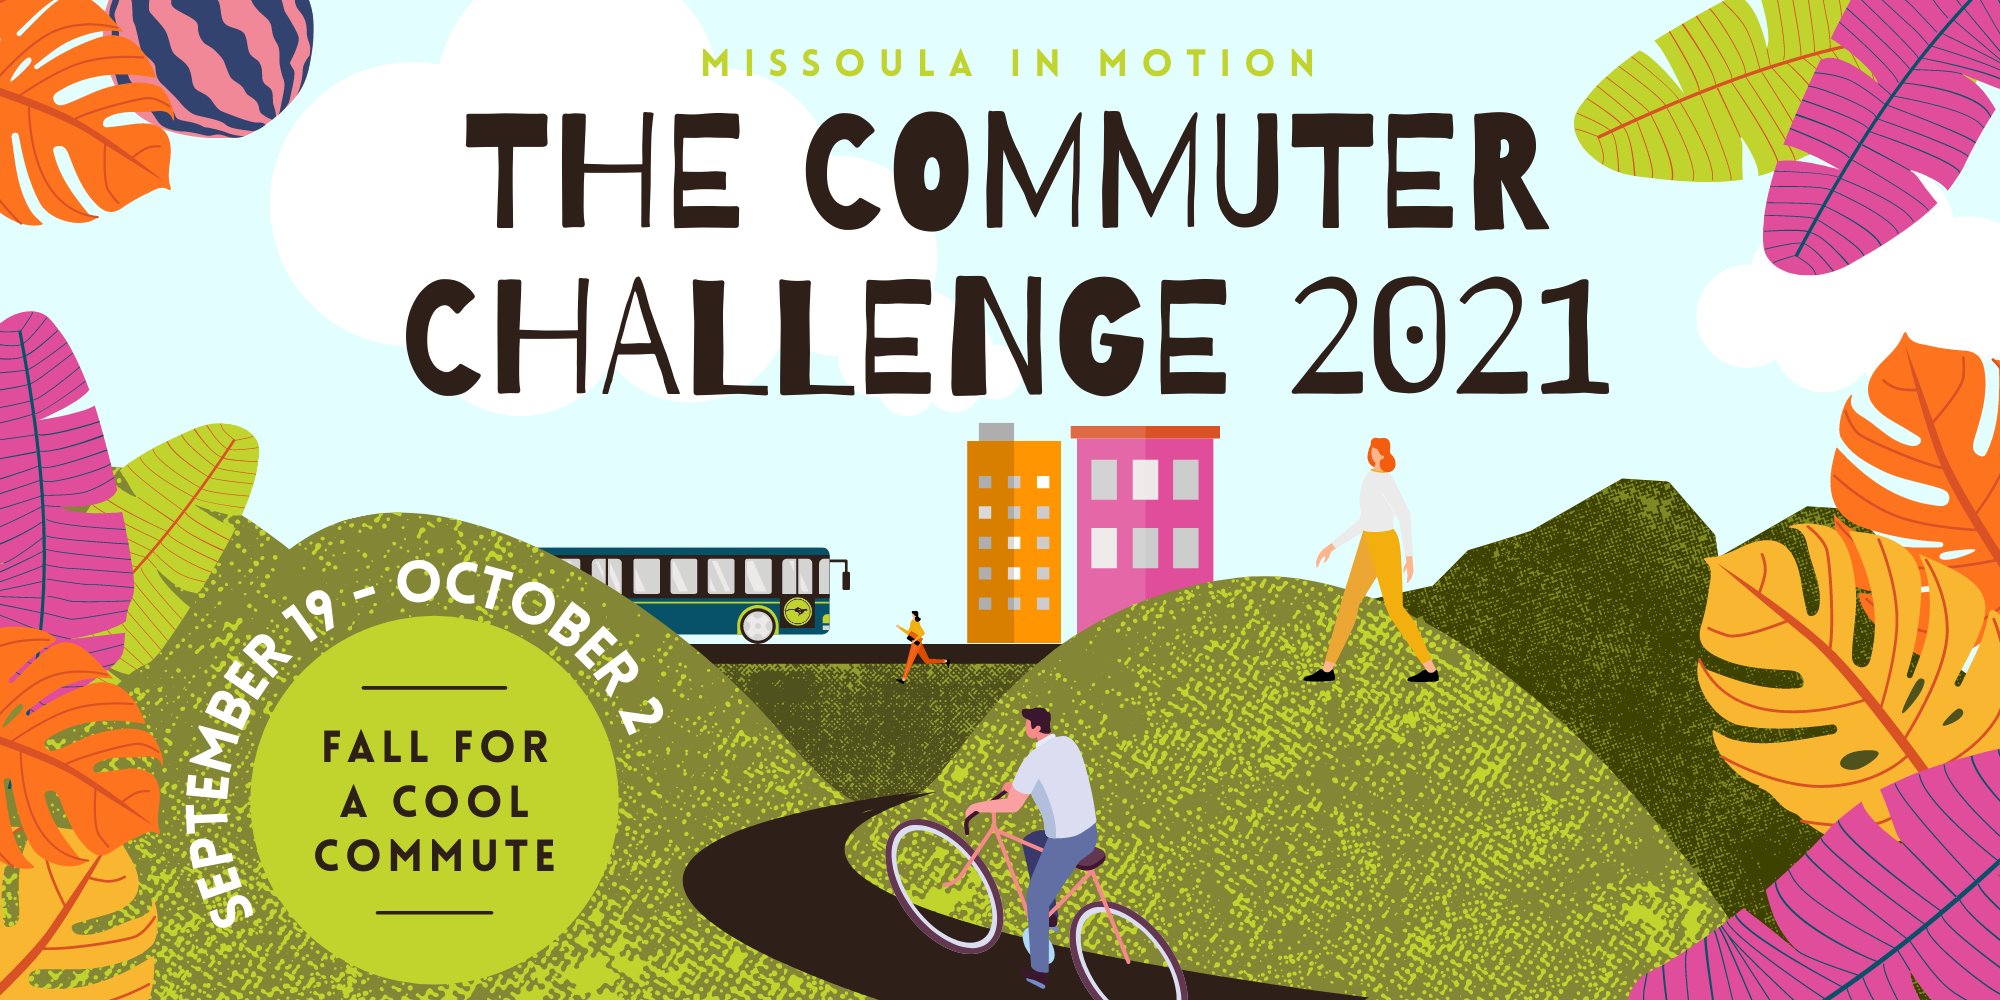 The Commuter Challenge 2021